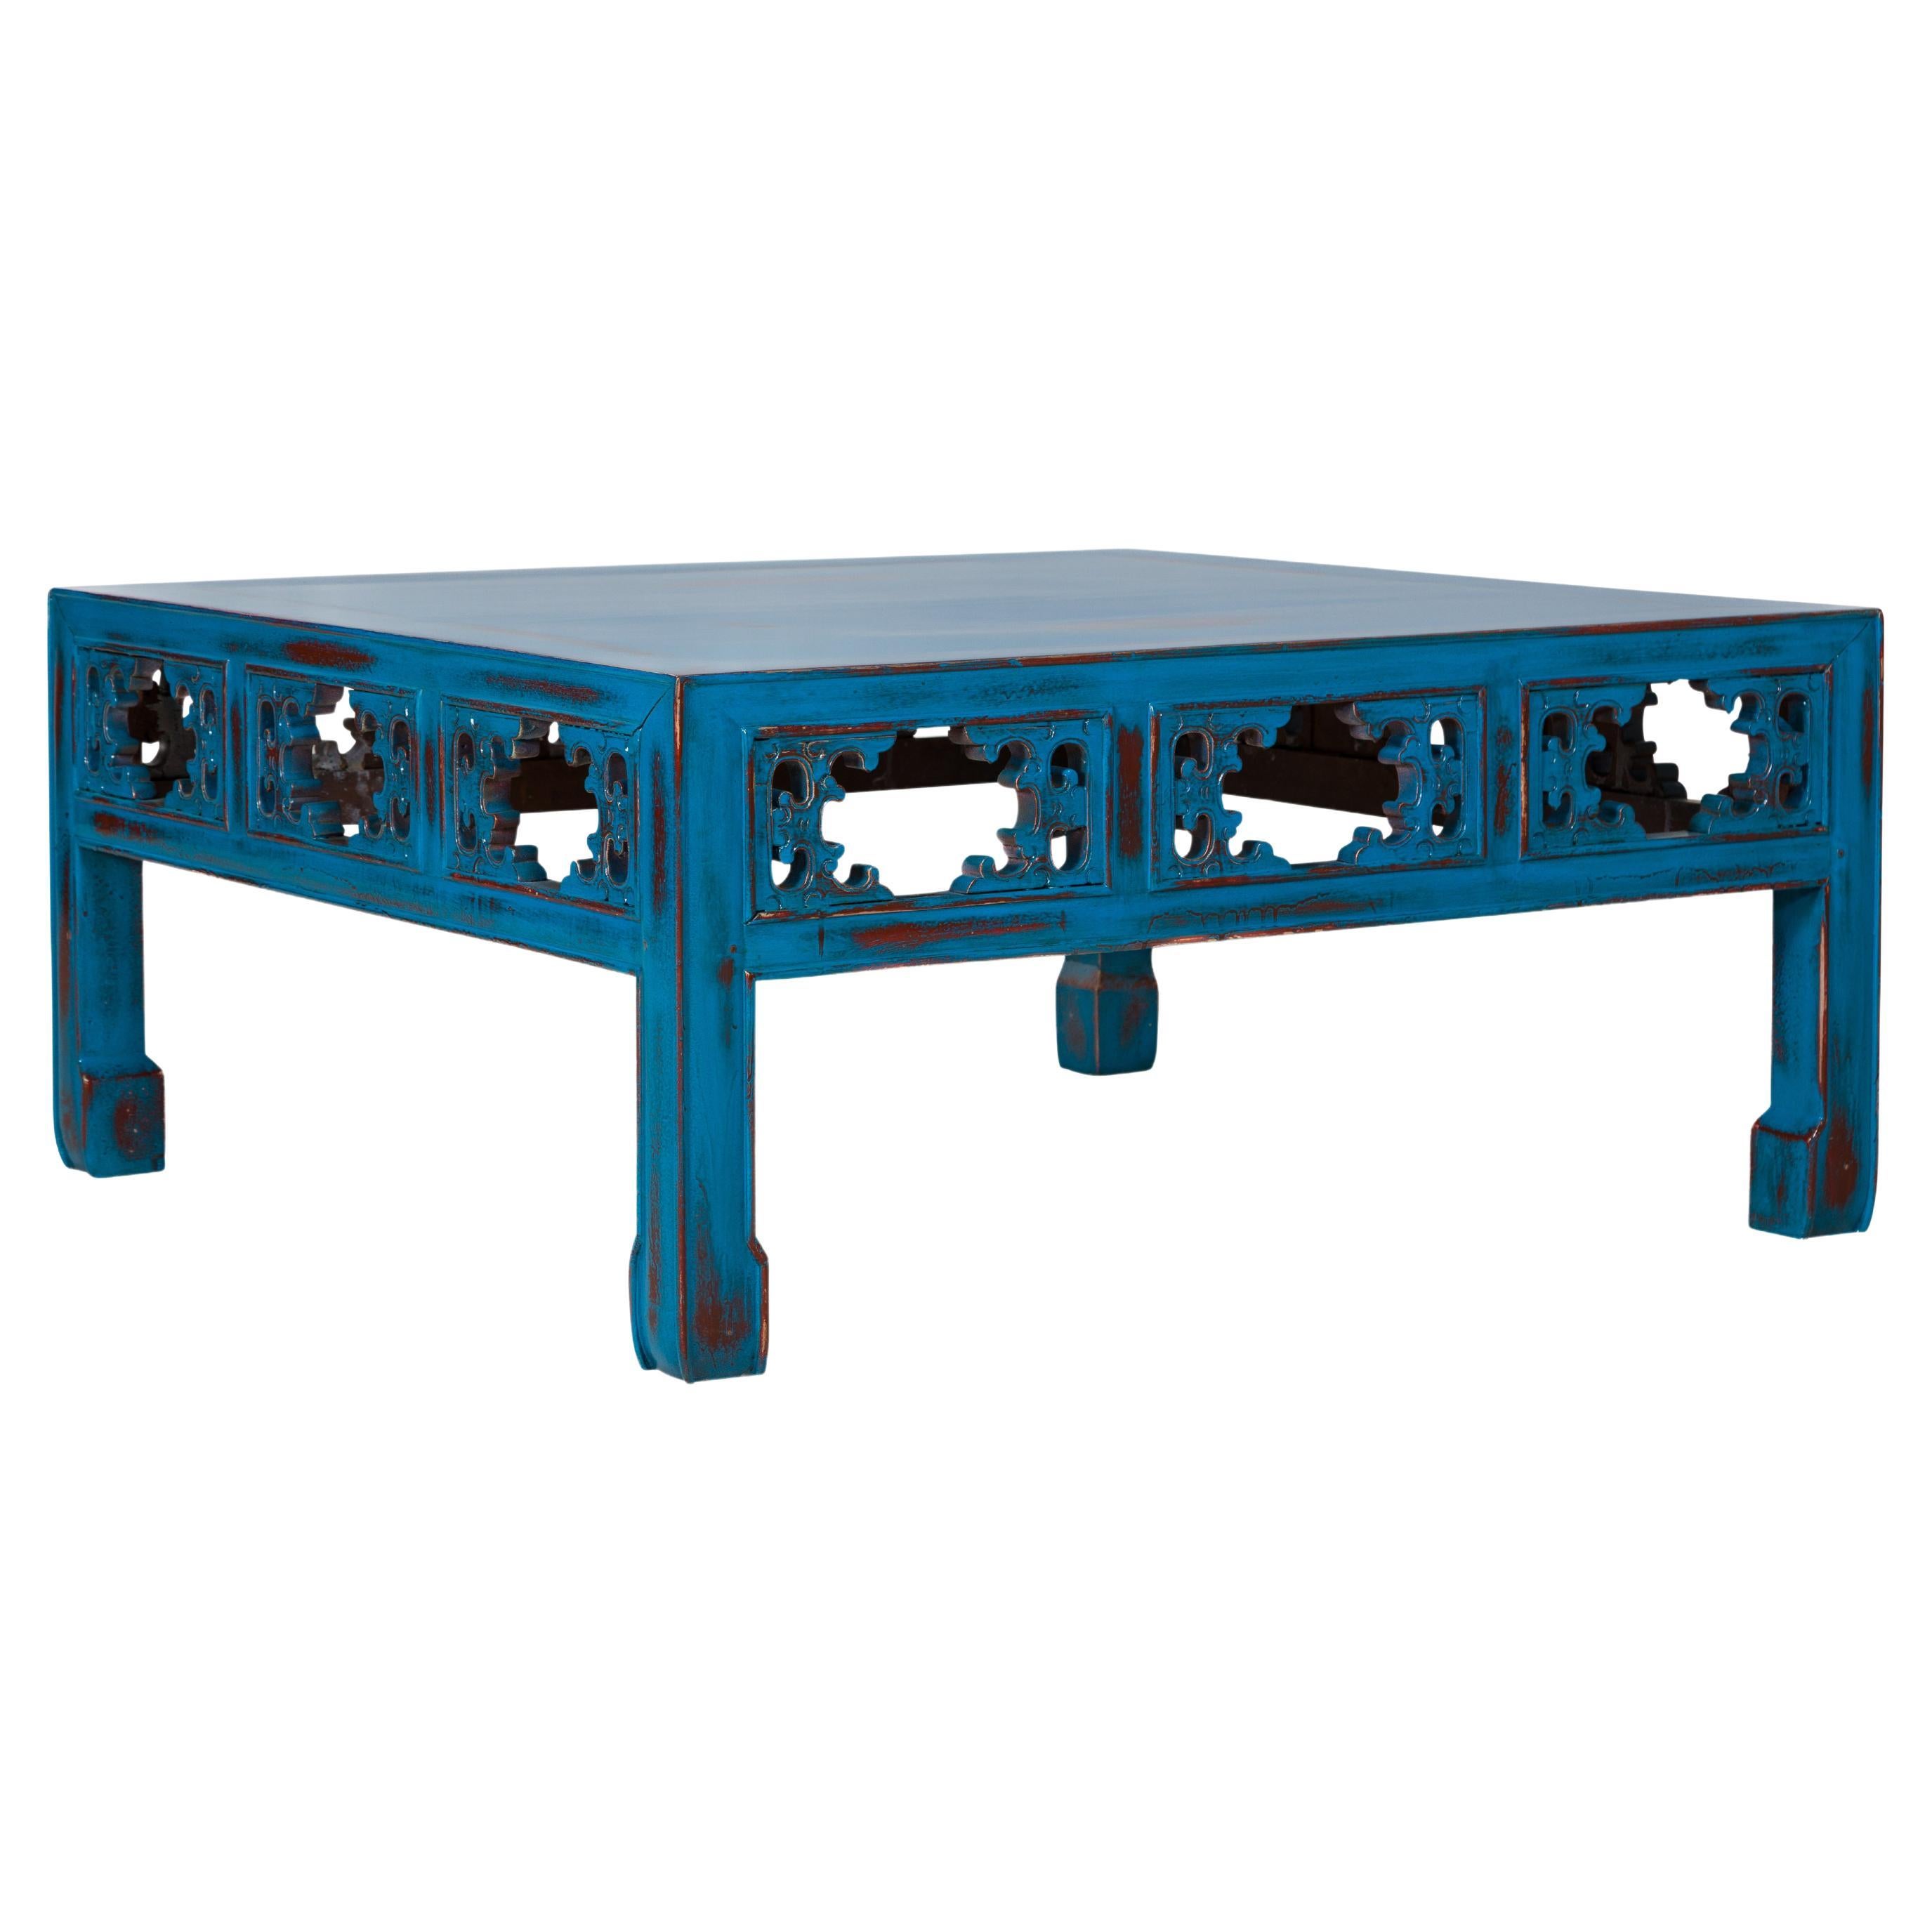 Qing Dynasty Coffee Table Custom Lacquered with a Distressed Blue Finish